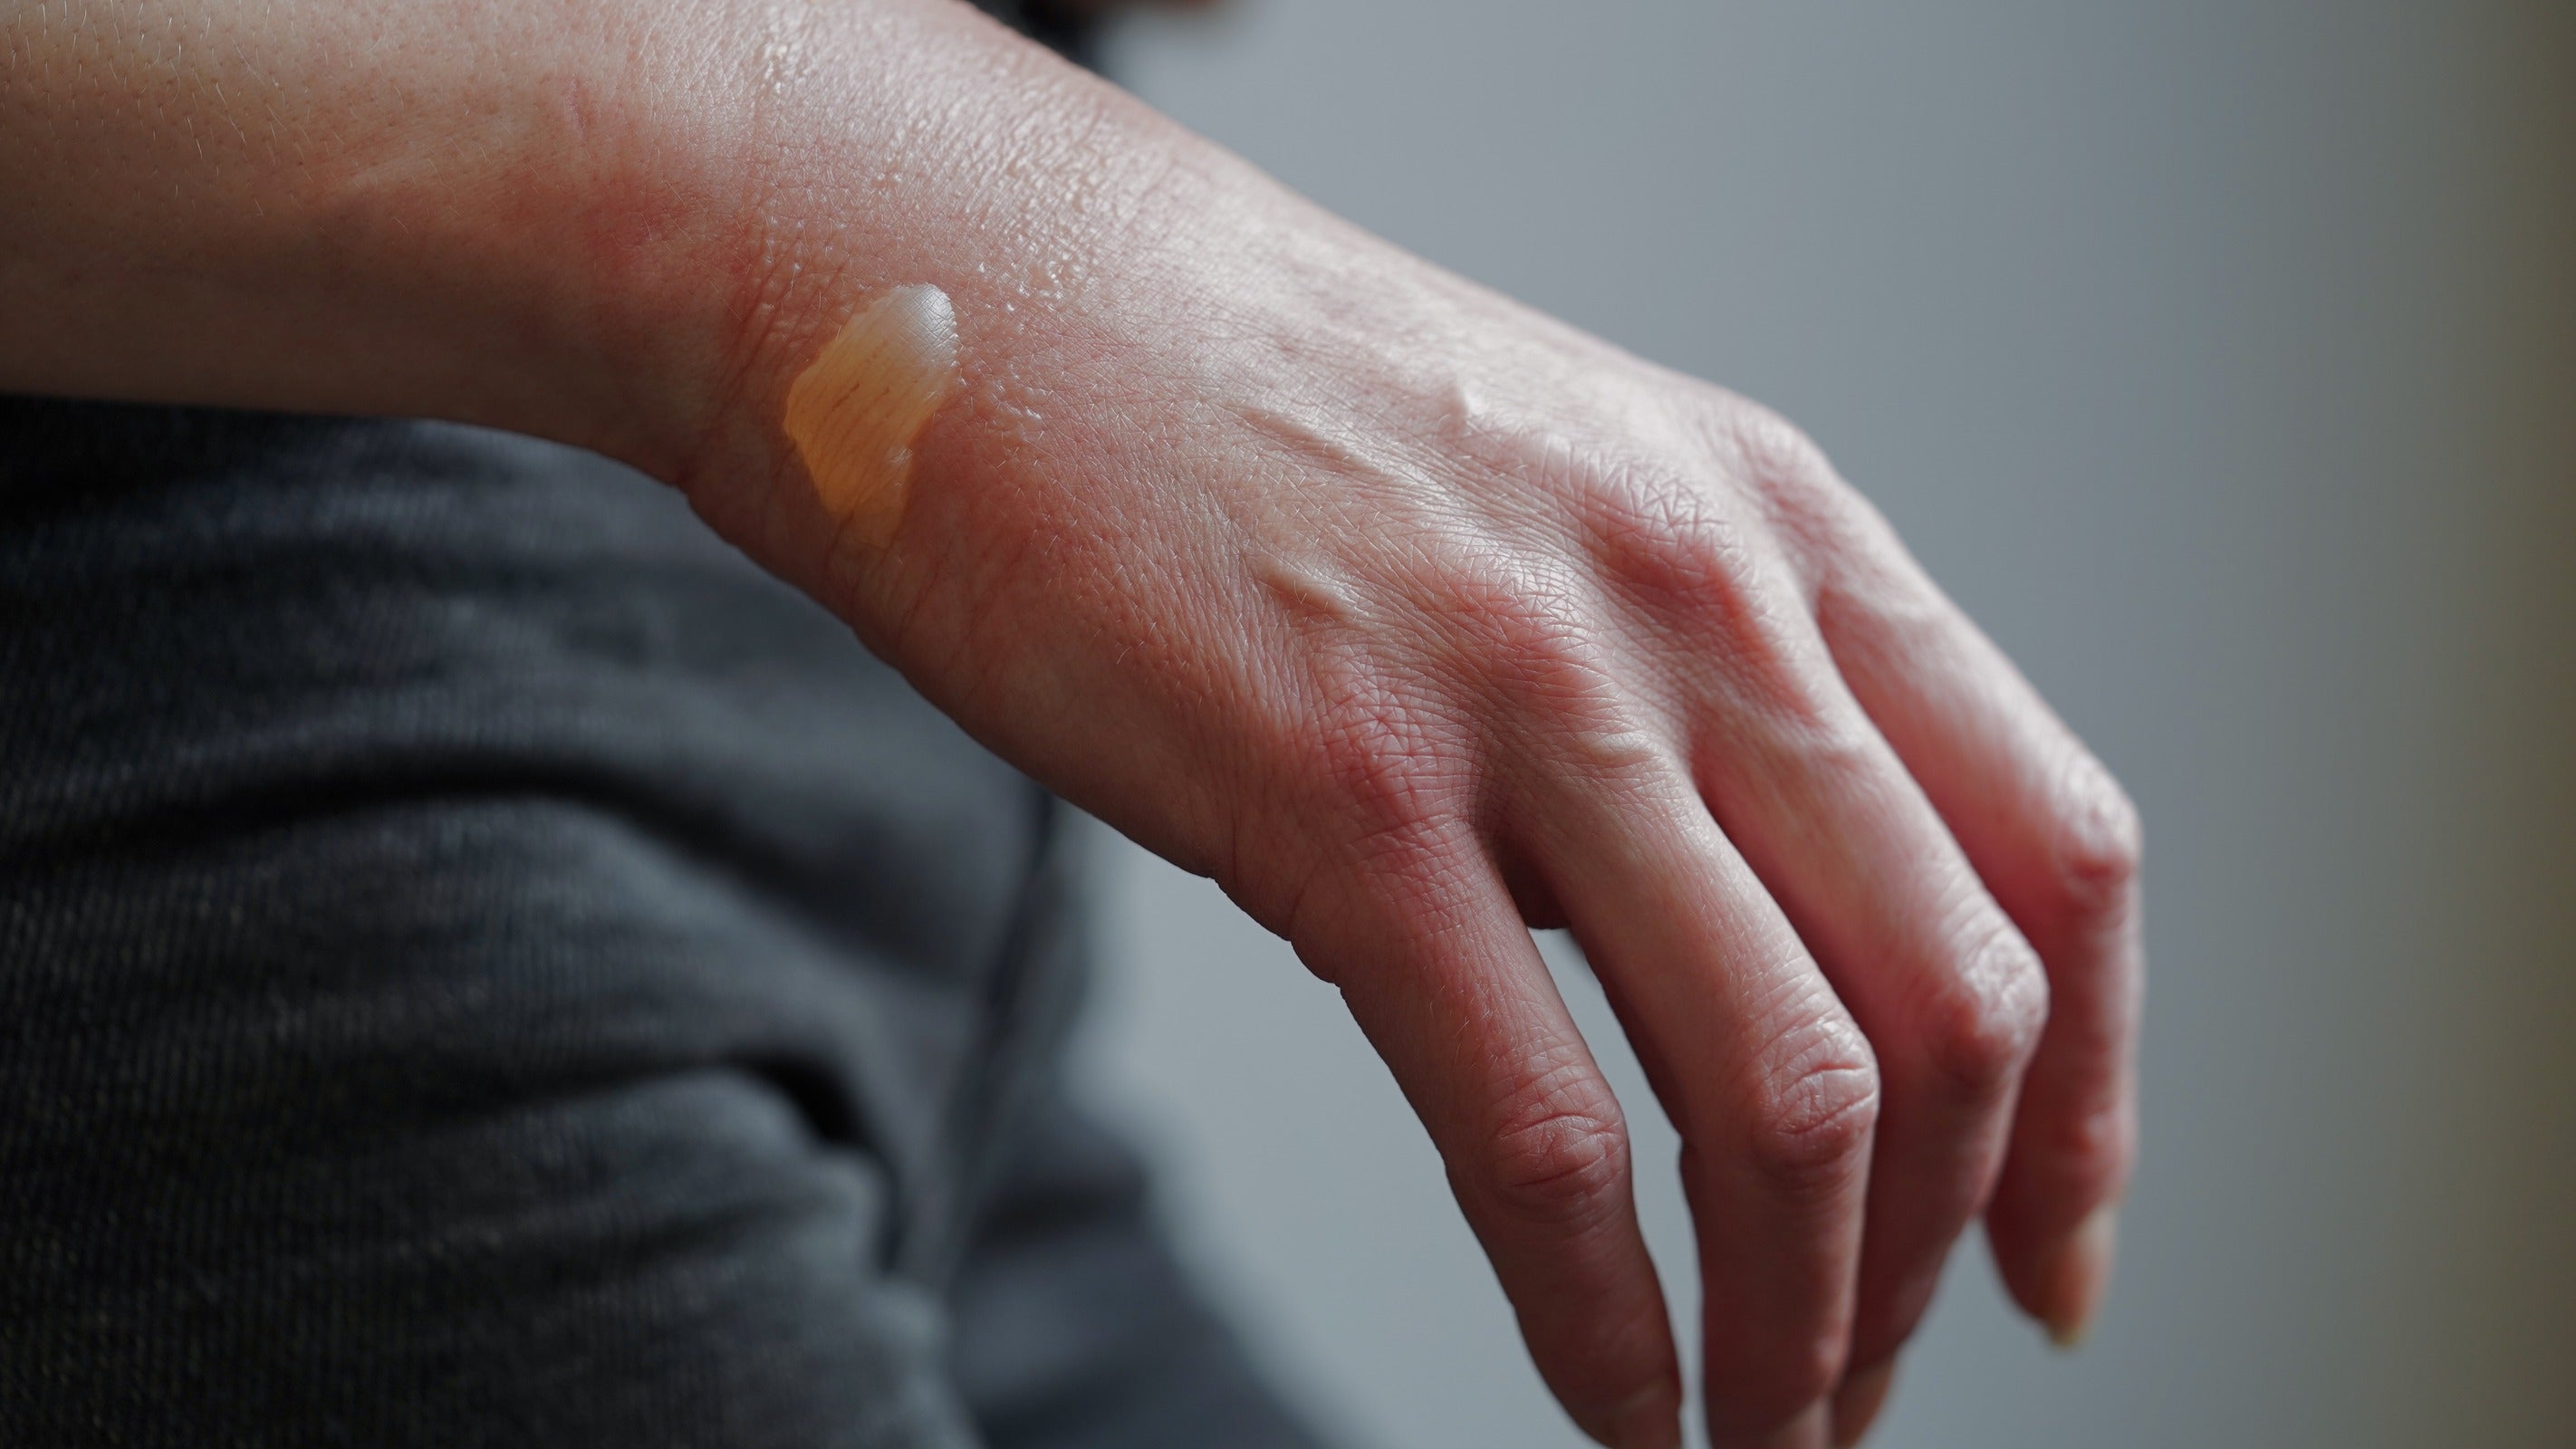 The 3 Factors Affecting the Time it Takes to Heal a Minor Burn